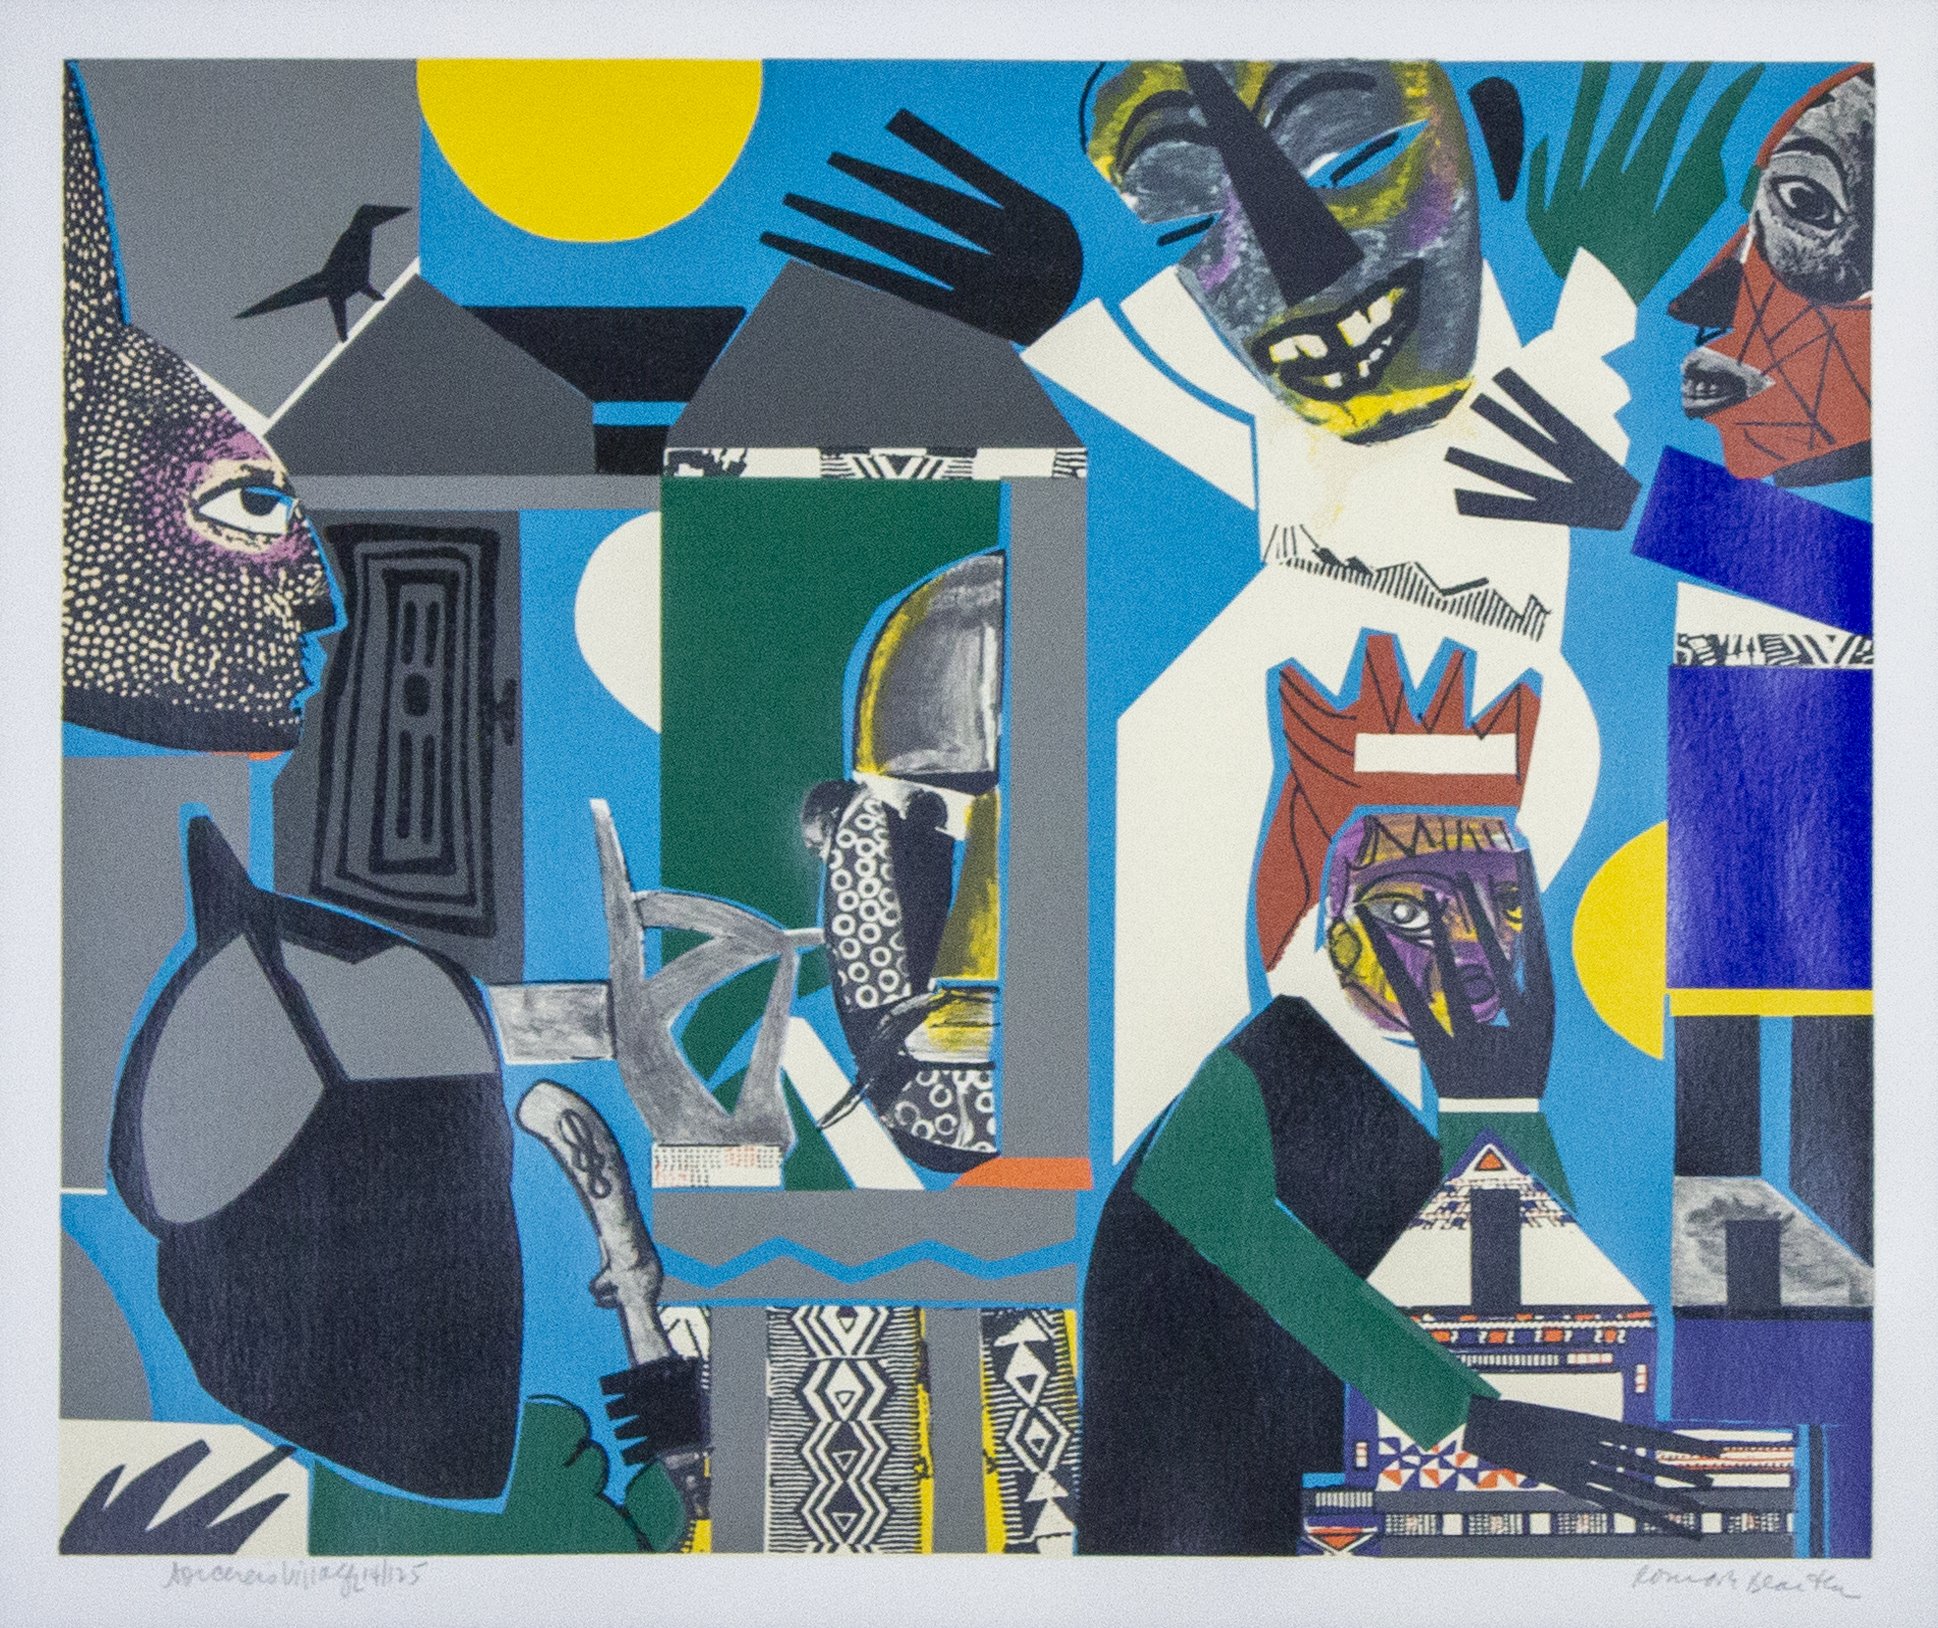  Romare Bearden,  Sorcerer's Village , ca. 1980, silkscreen, The Paul R. Jones Collection of American Art at the University of Alabama, ©2023 Romare Bearden Foundation / Licensed by VAGA at Artists Rights Society (ARS), NY    